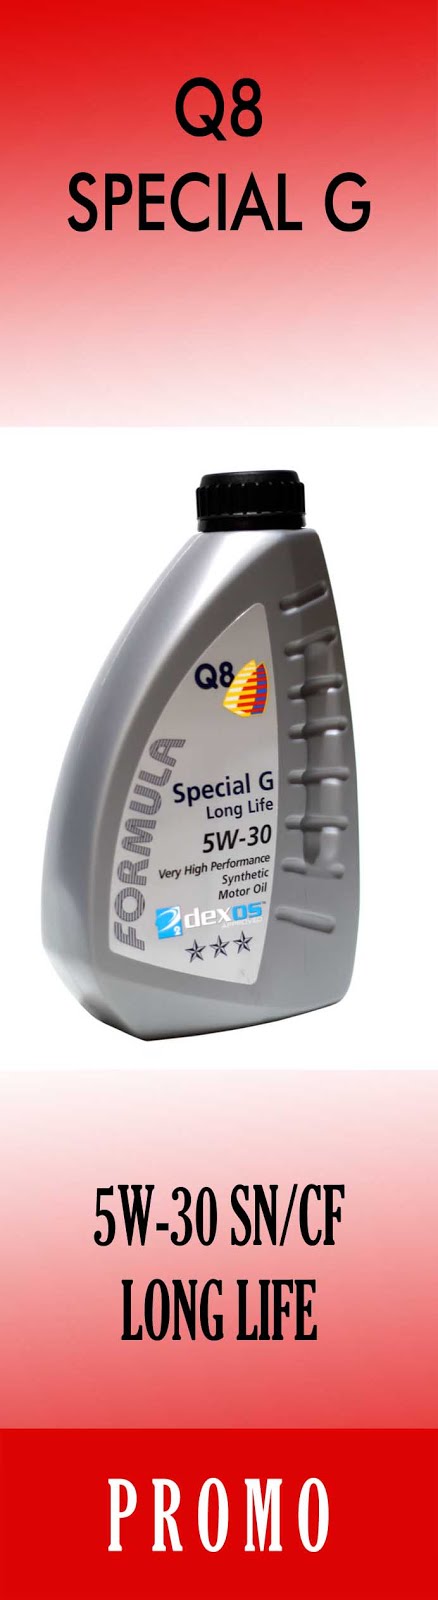 Q8 Special G Long Life 5W-30